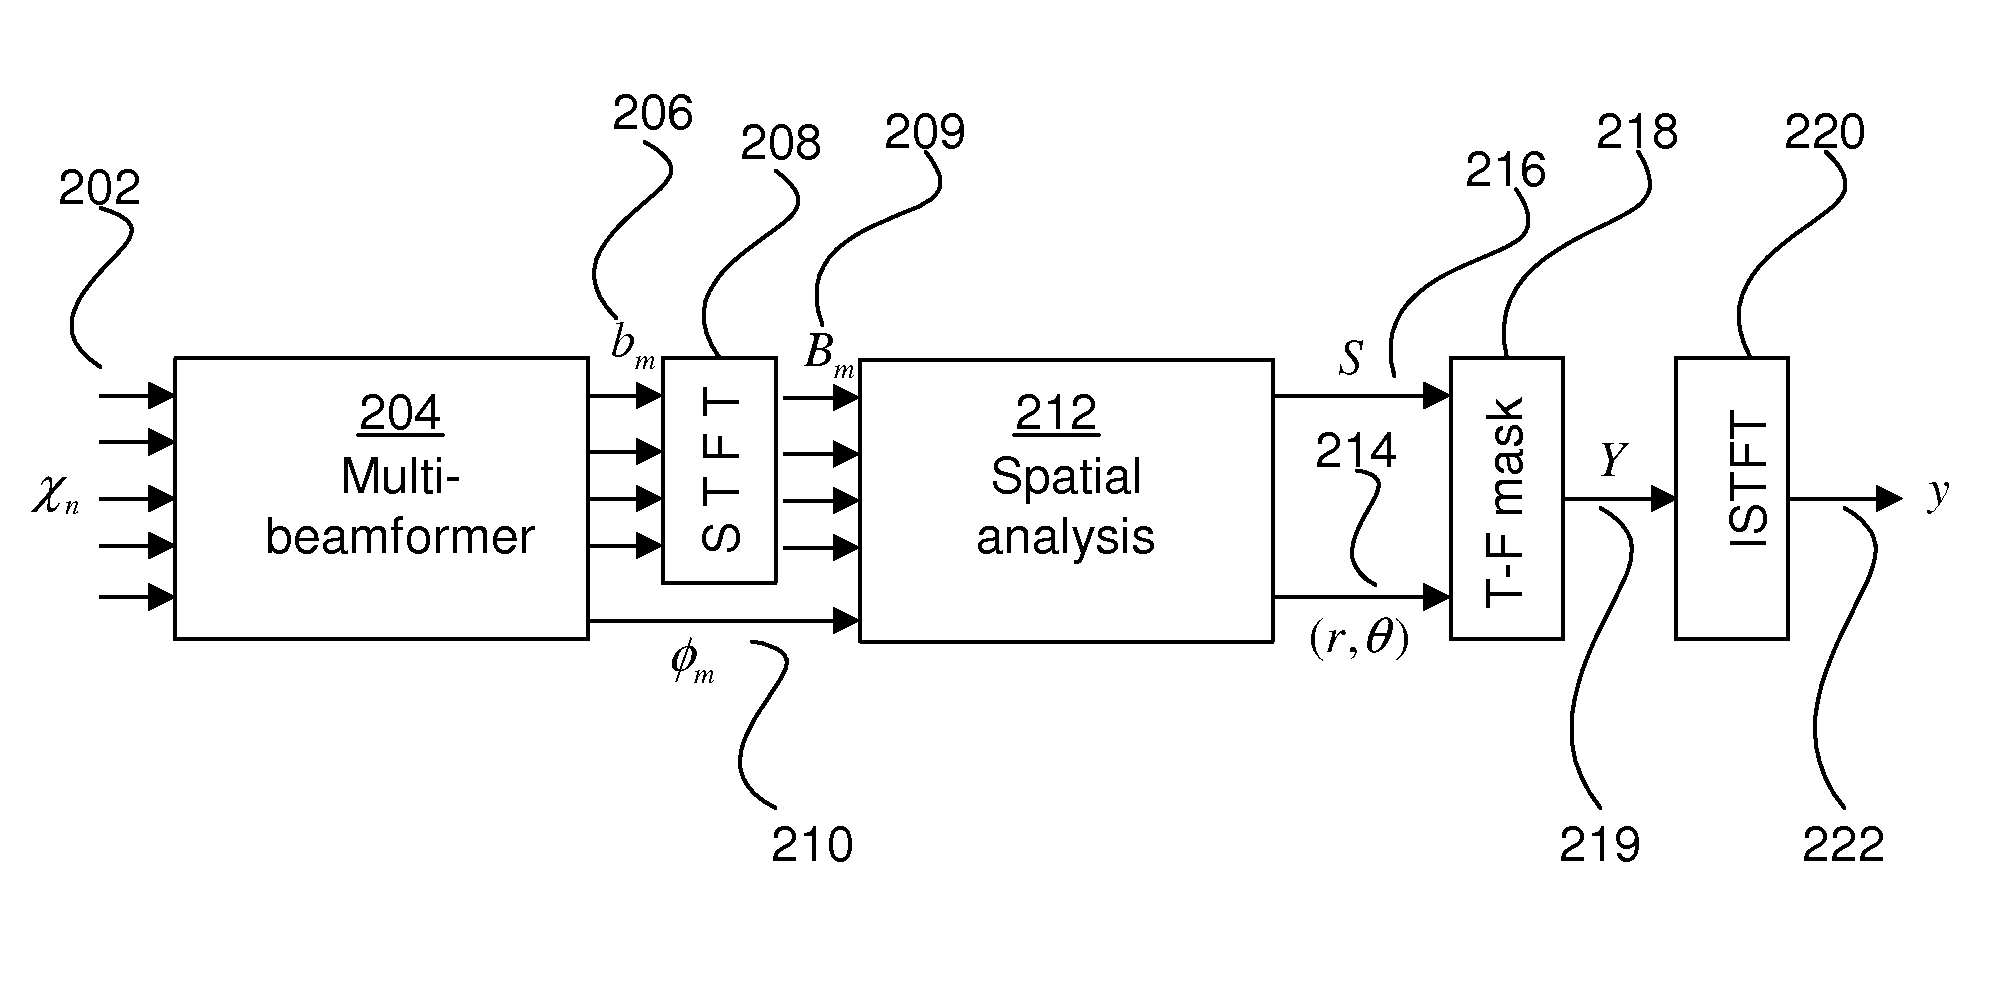 Microphone array processor based on spatial analysis